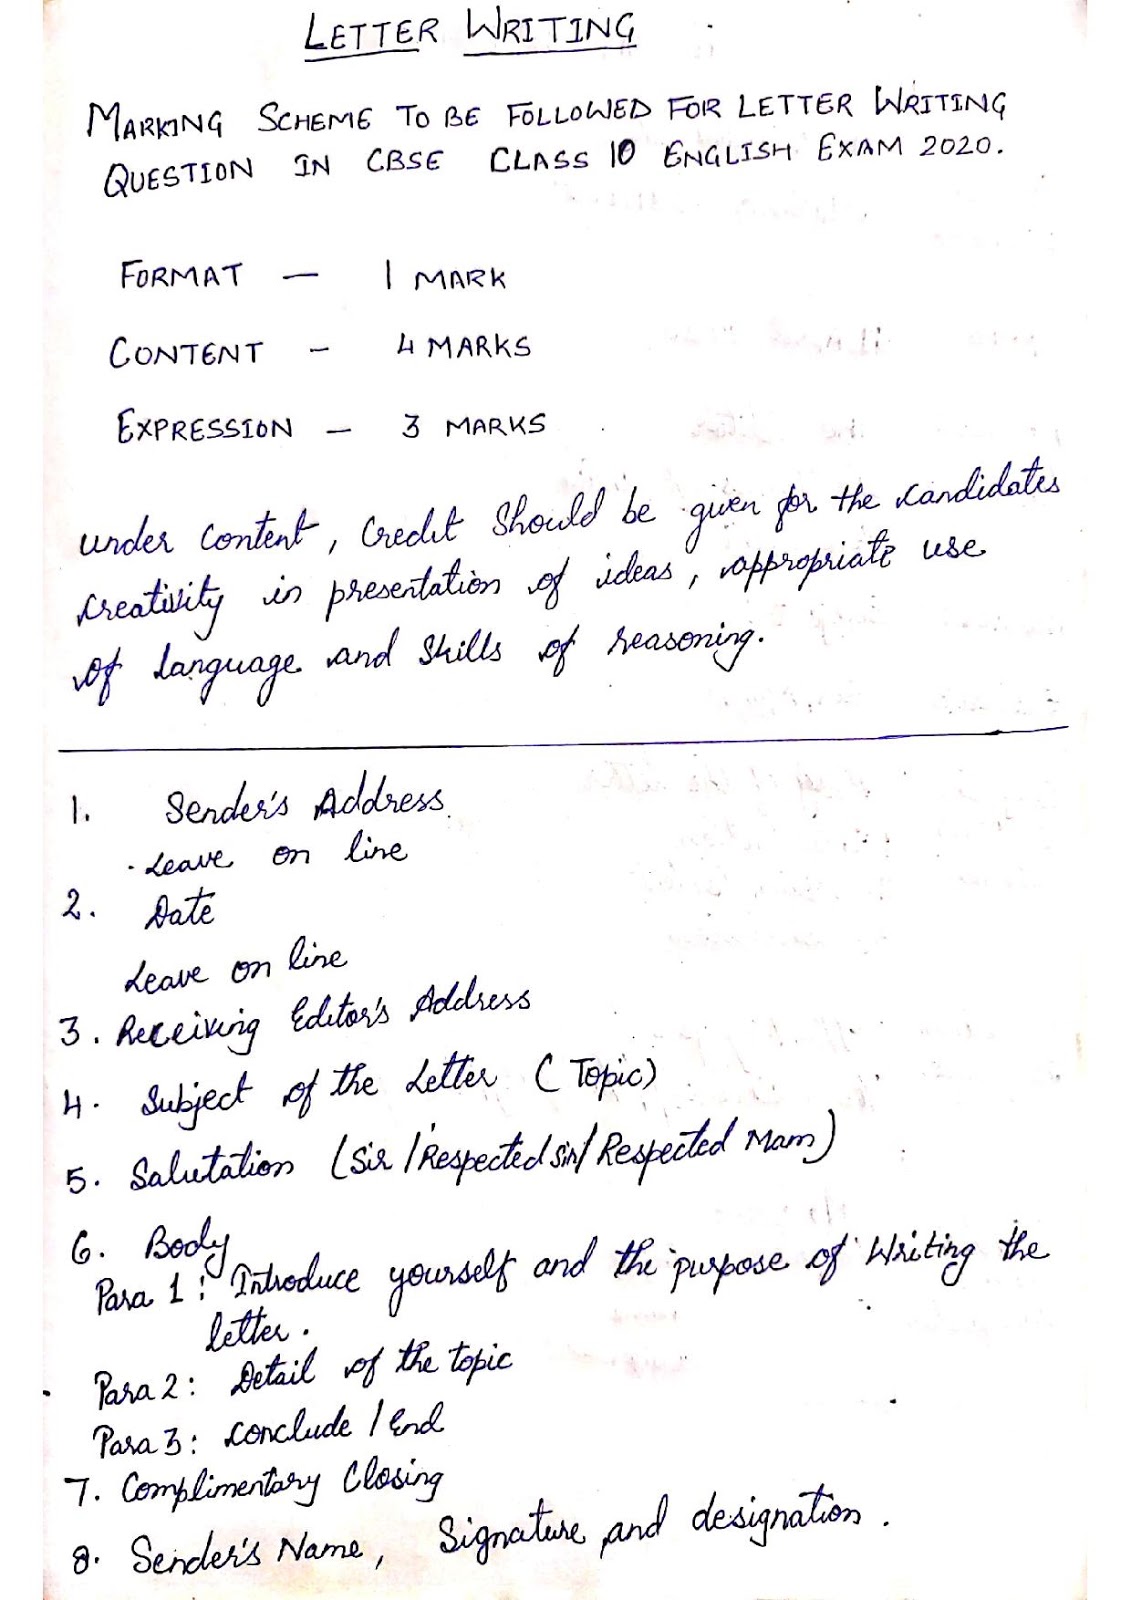 apsg-class-8th-writing-section-letter-writing-theory-format-specimen-example